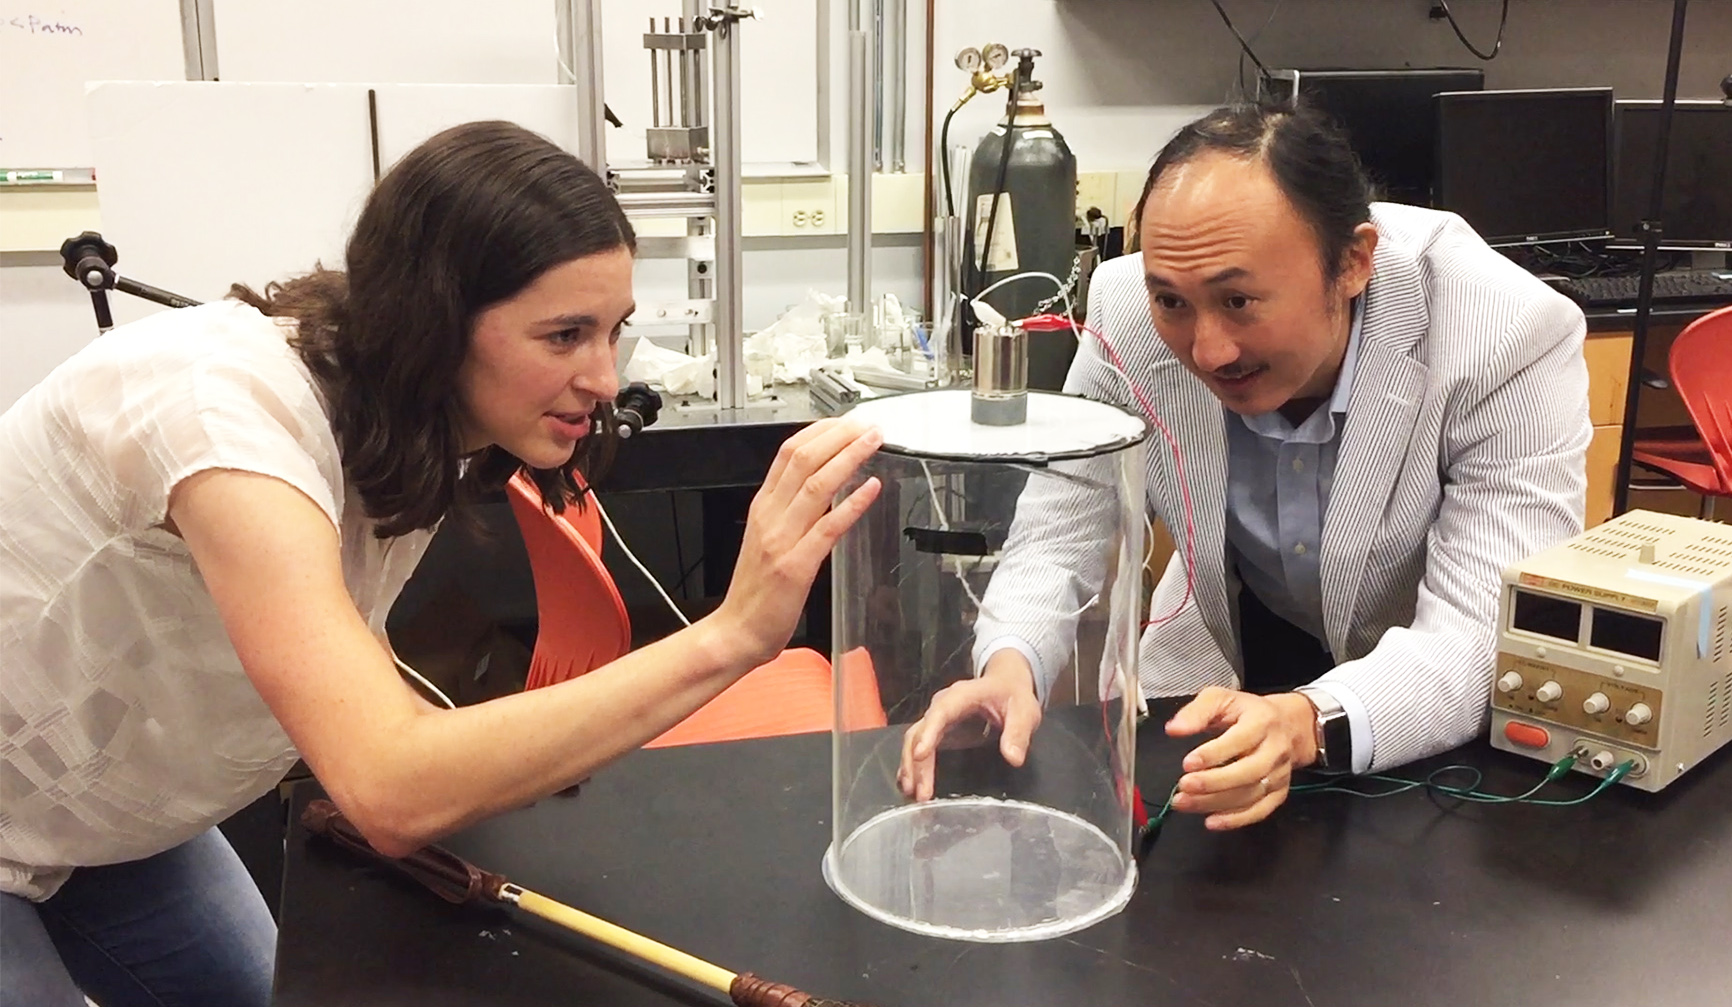 Marguerite Matherne, a mechanical engineering Ph.D. student, and Professor David Hu examine the mammal tail simulator used to study the airflow needed to keep mosquitoes from landing. (Credit: John Toon, Georgia Tech)